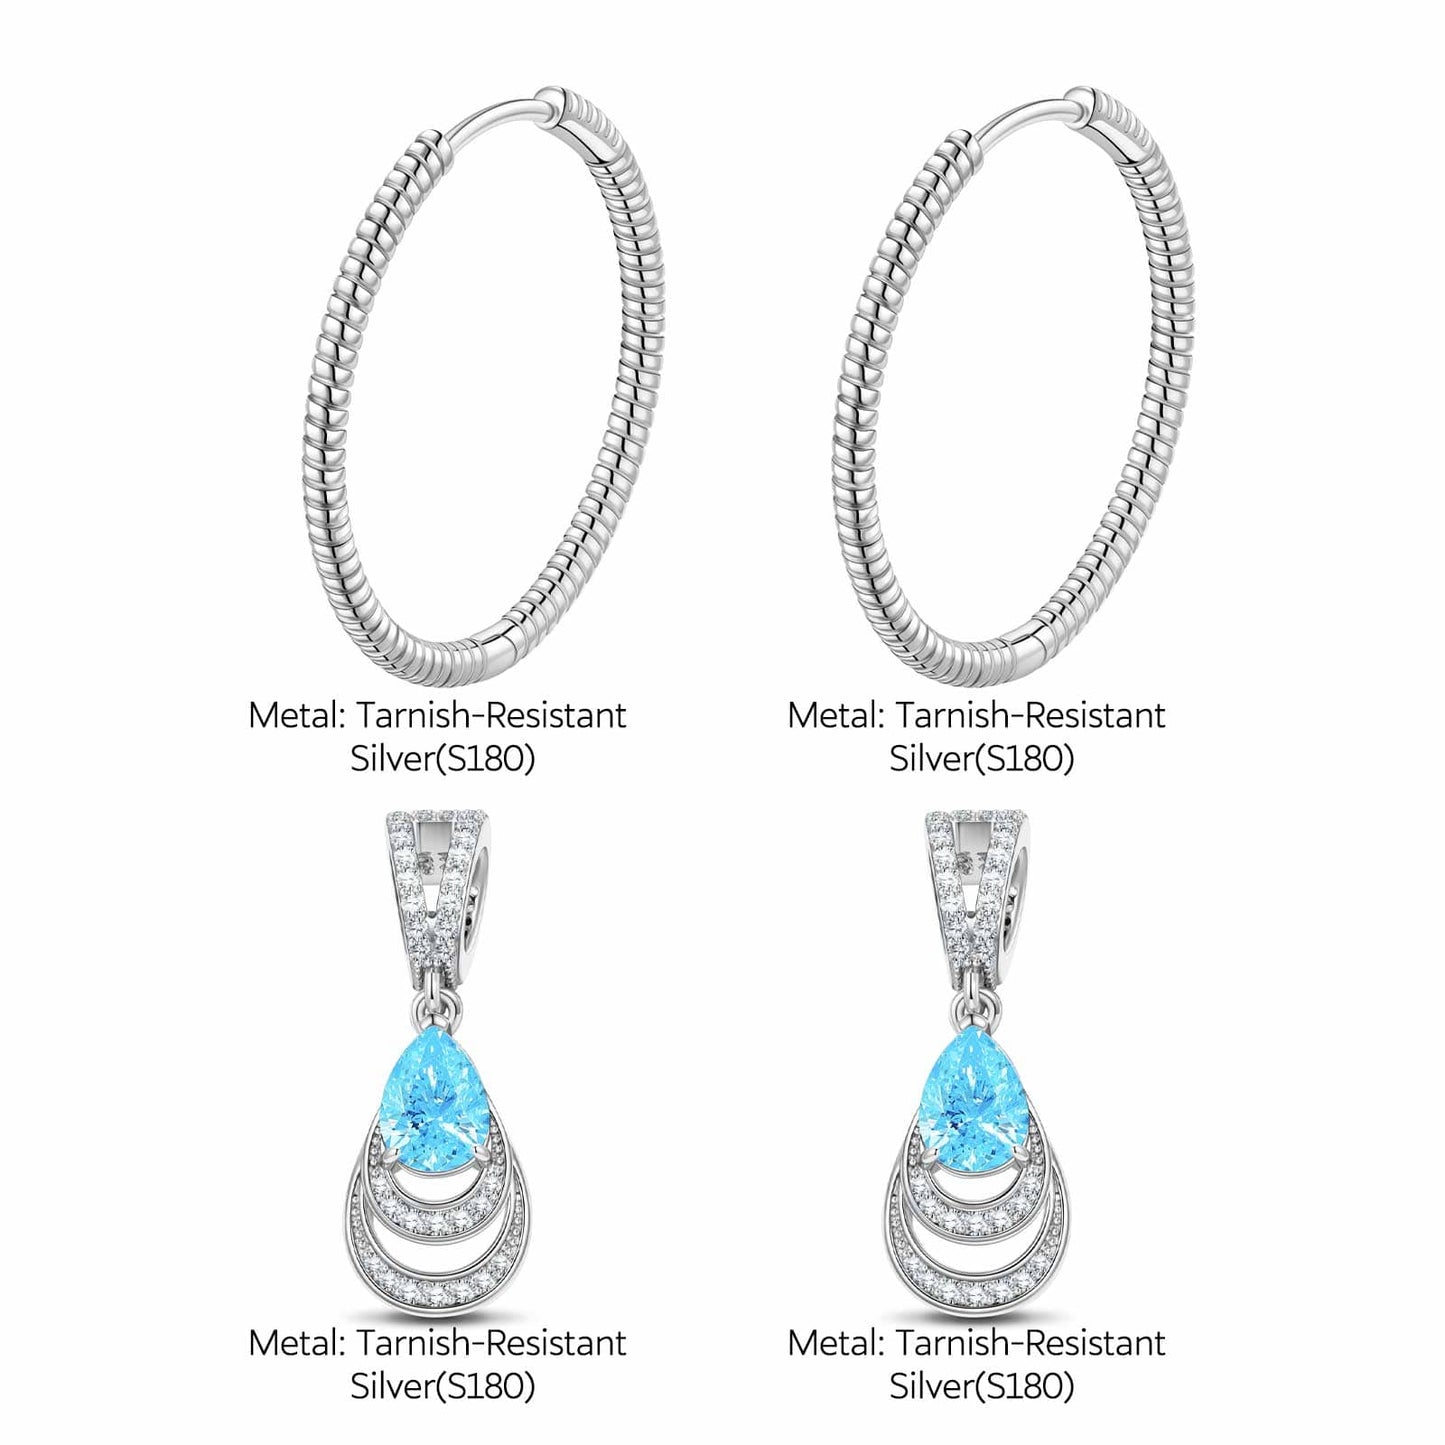 Mermaid's Tear Tarnish-resistant Silver Charms Earrings Set with Sterling Silver Ear Post In White Gold Plated